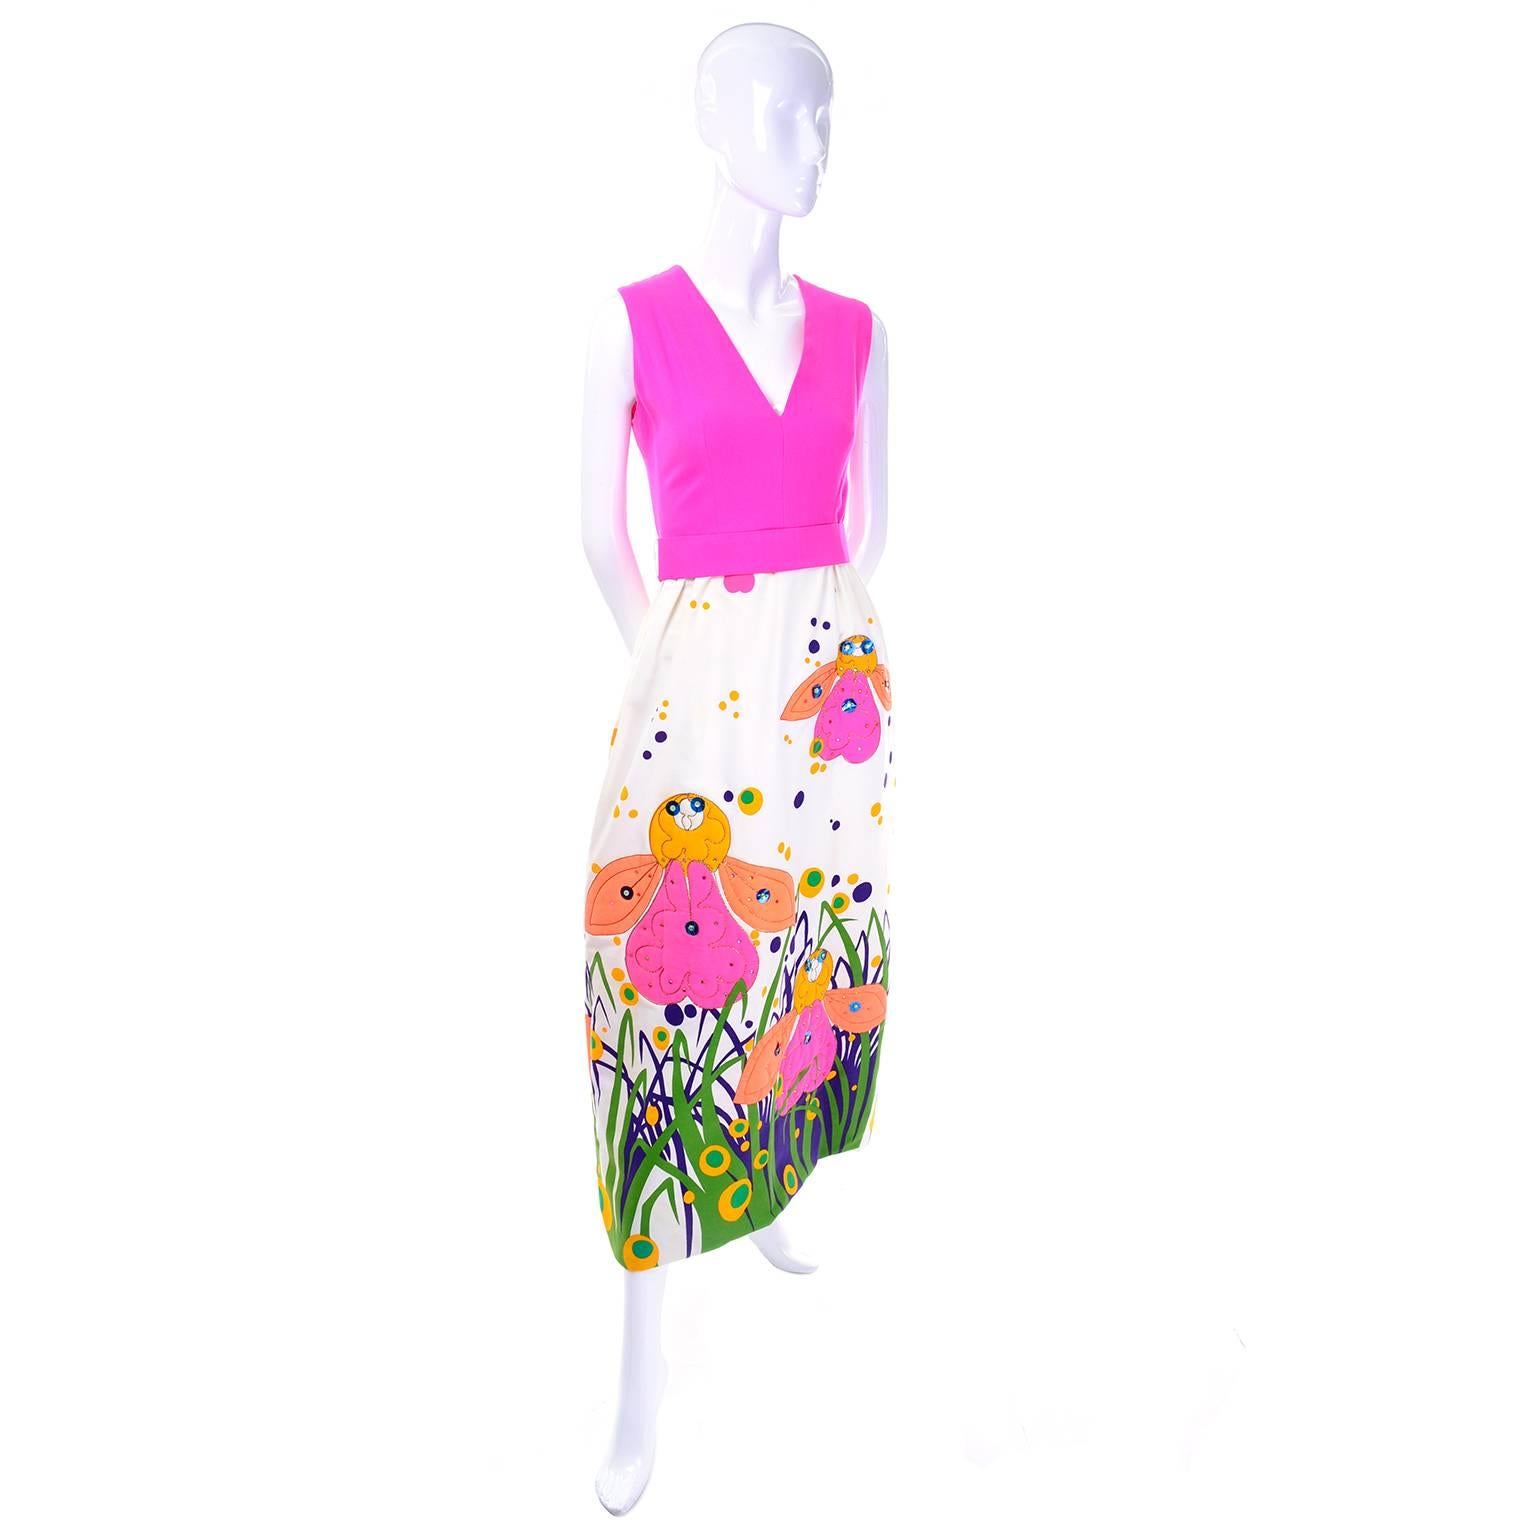 This vintage dress was designed by Gino Charles in the 1960's.This fabulous sleeveless maxi dress has a sensational rare design with a bright pink bodice and a v neck. The long skirt of the dress has polka dots, and bright pink, yellow and orange